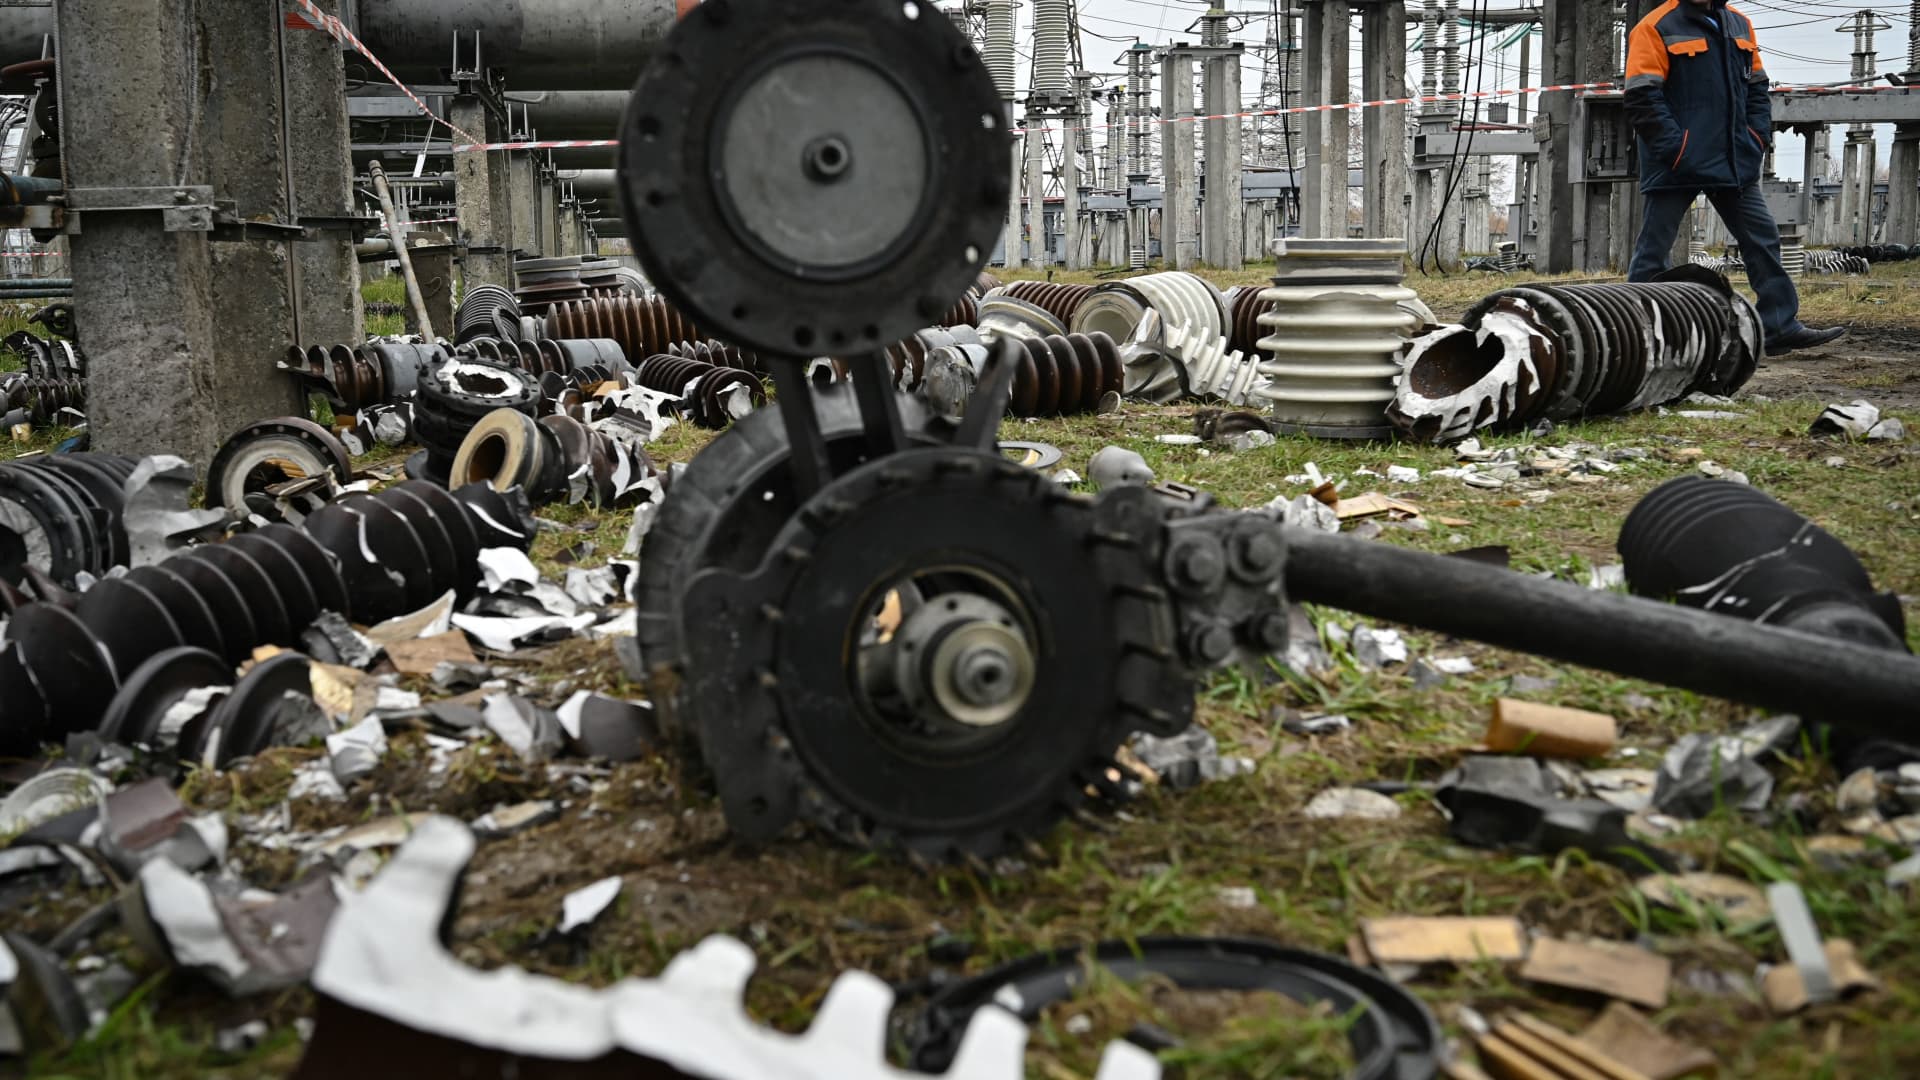 A worker walks past damaged equipment at a high-voltage substation of the operator Ukrenergo after a missile attack, in central Ukraine, on November 10, 2022 amid the Russian invasion of Ukraine.